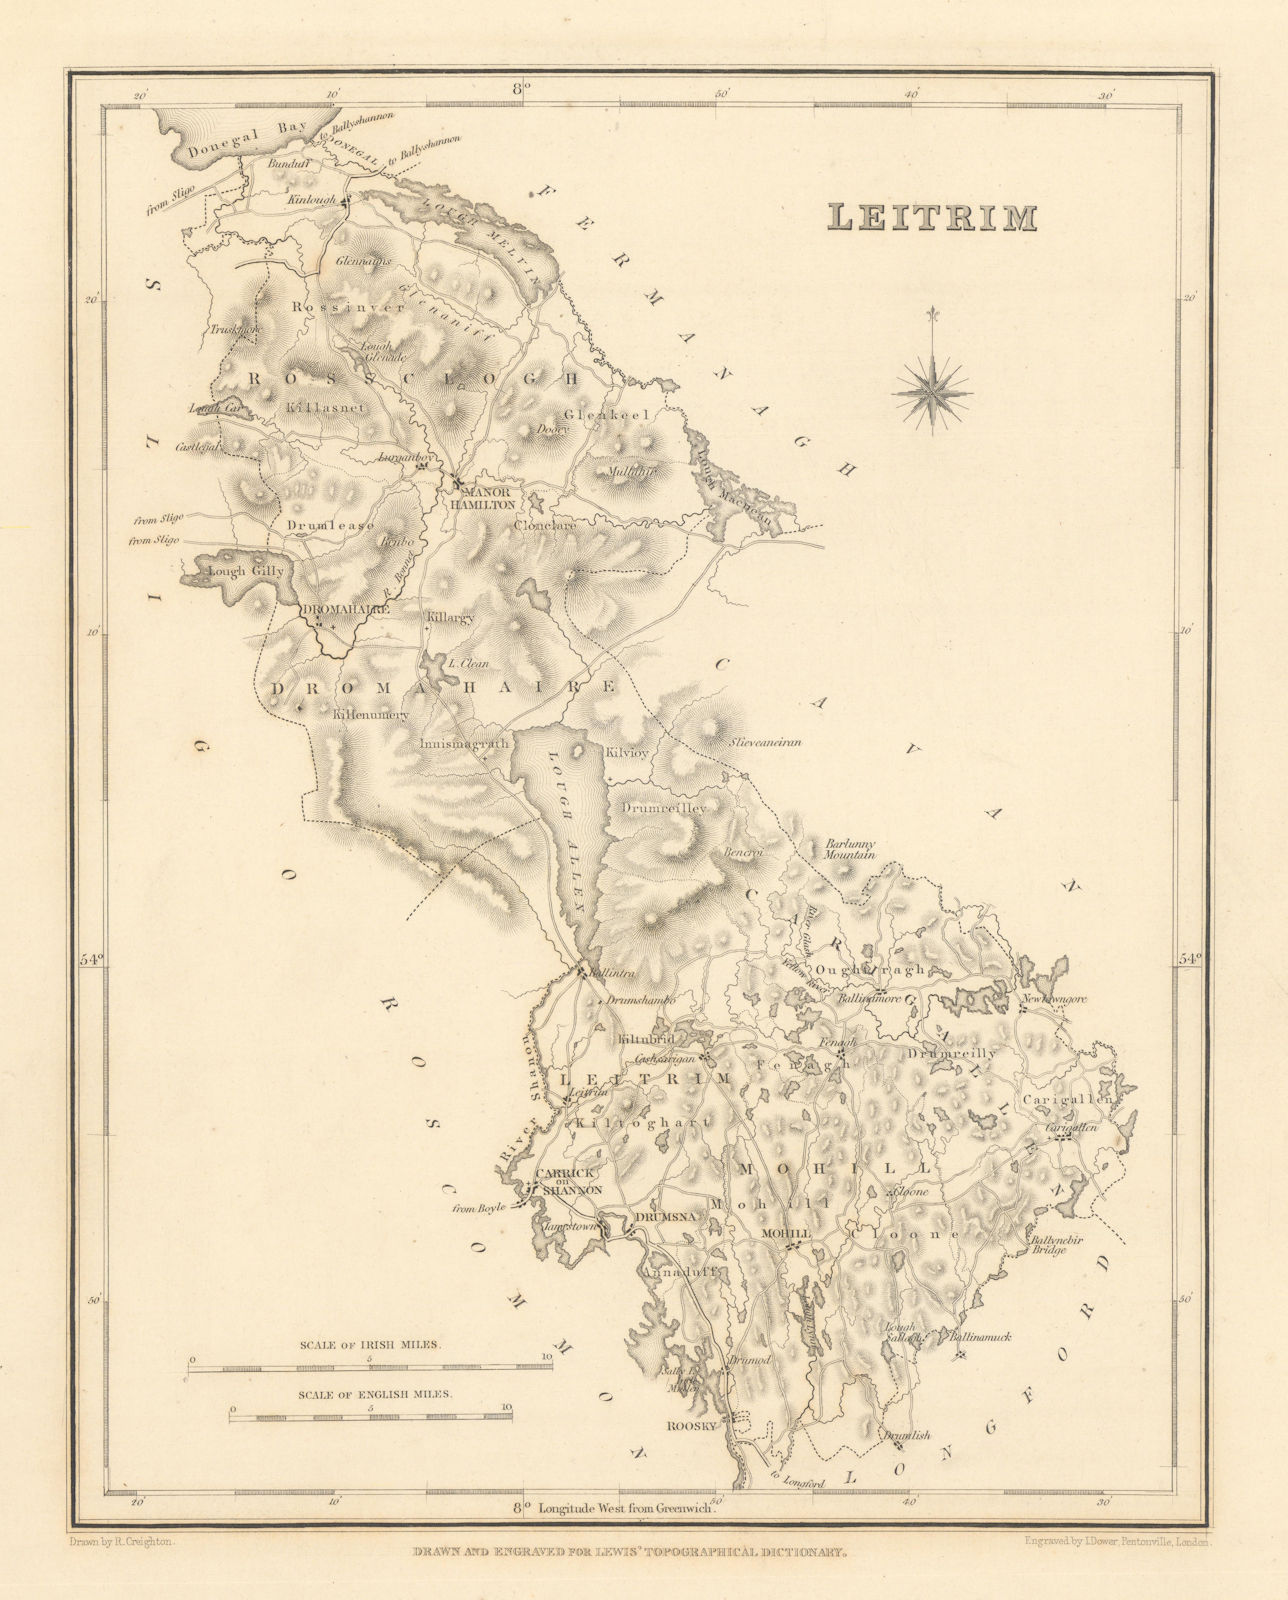 COUNTY LEITRIM antique map for LEWIS by CREIGHTON & DOWER - Ireland 1837